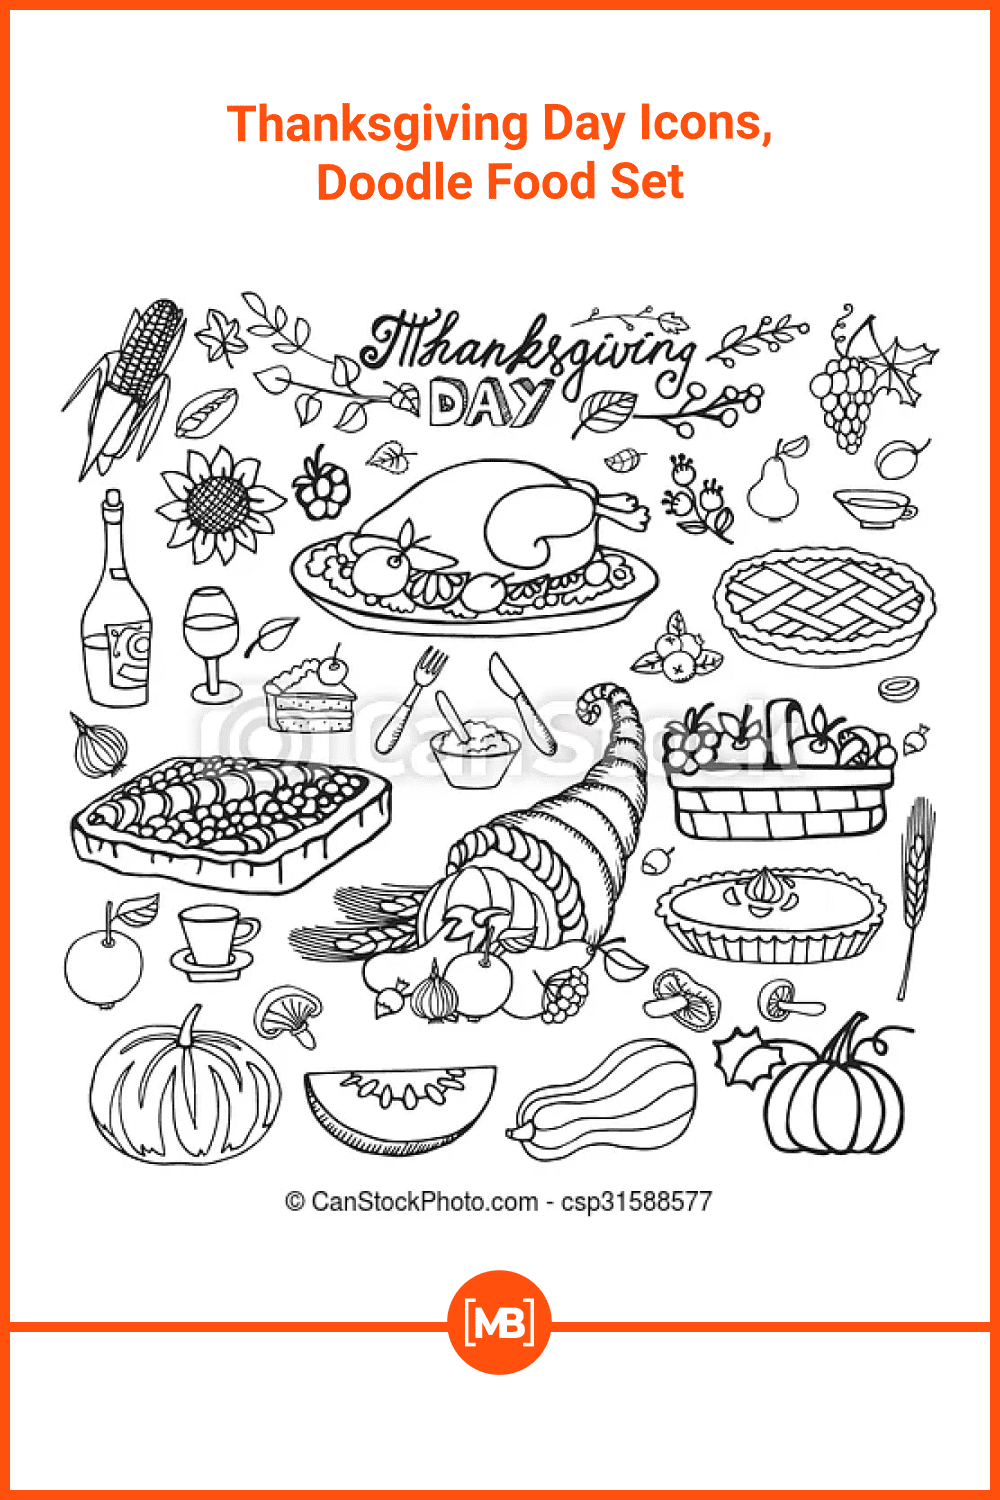 Thanksgiving day icons, doodle food set.